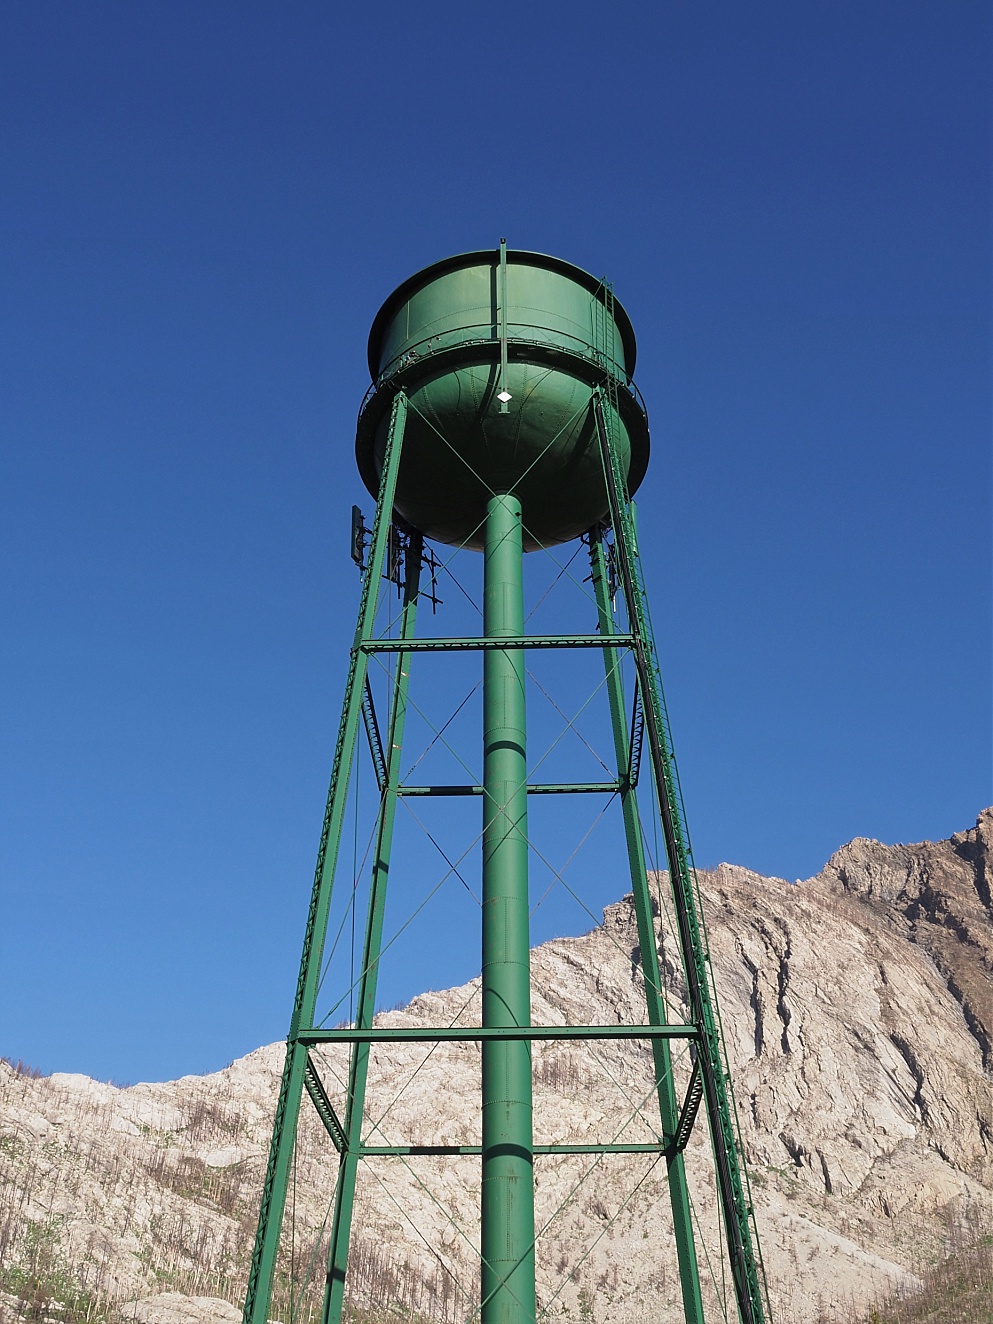 Water tower towering over mountain in background